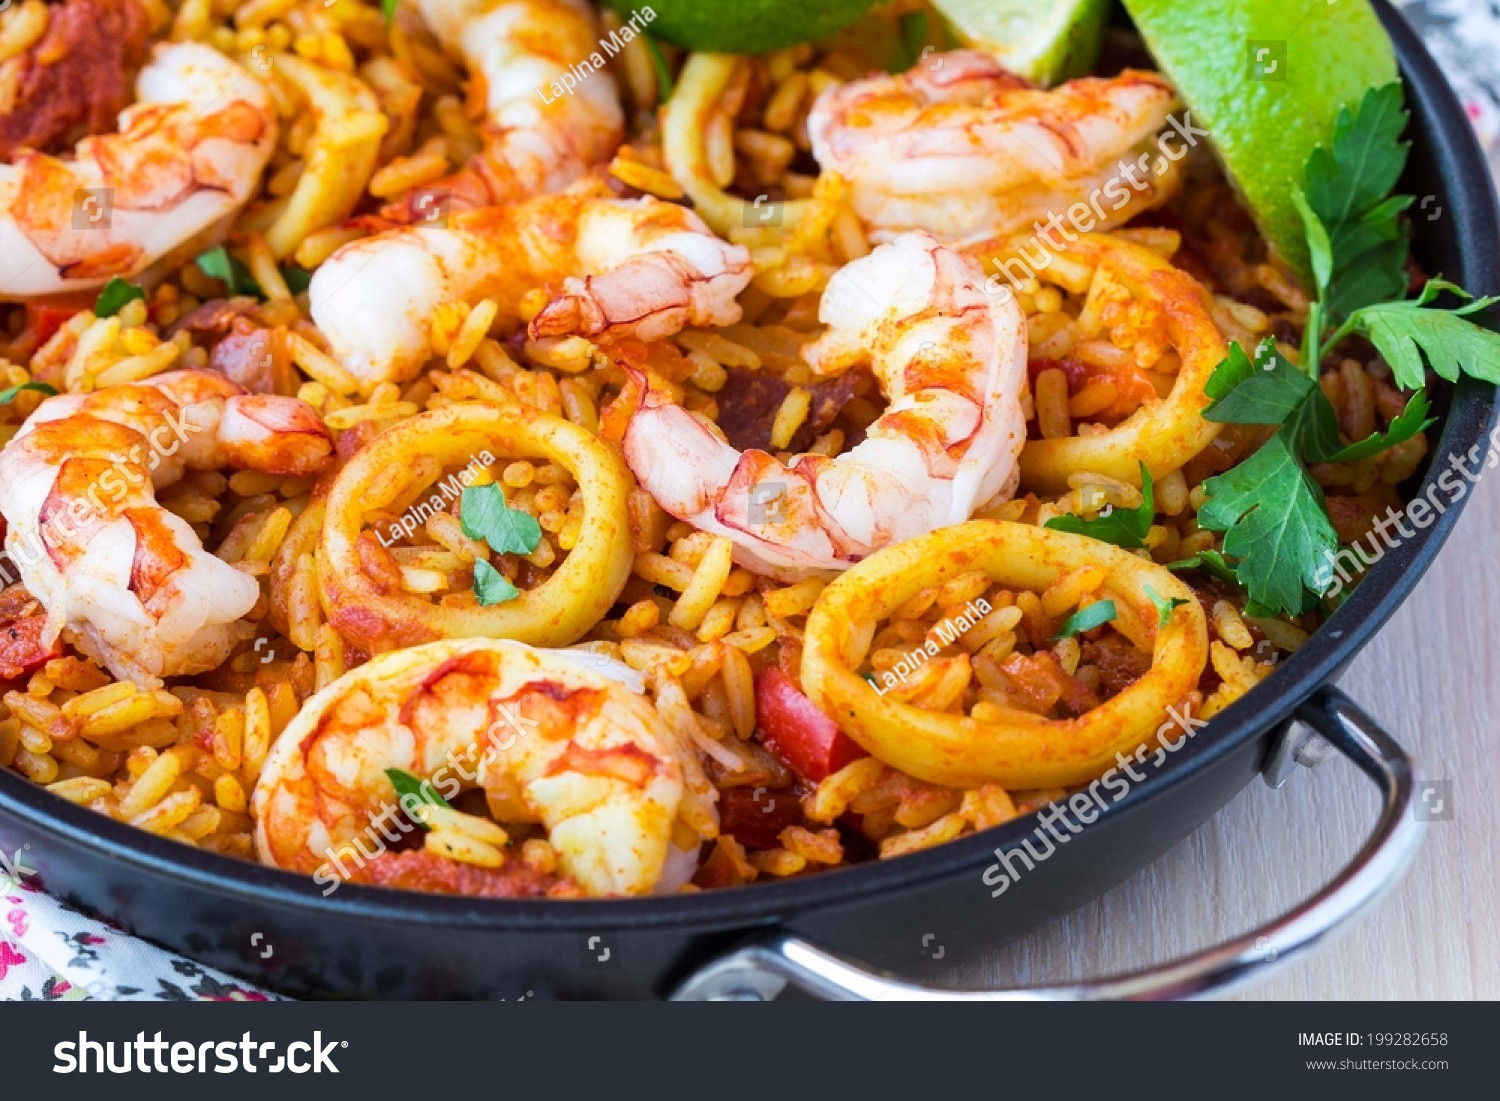 Spanish Rice Dish With Seafood
 Spanish Dish Paella With Seafood Shrimps Squid Rice